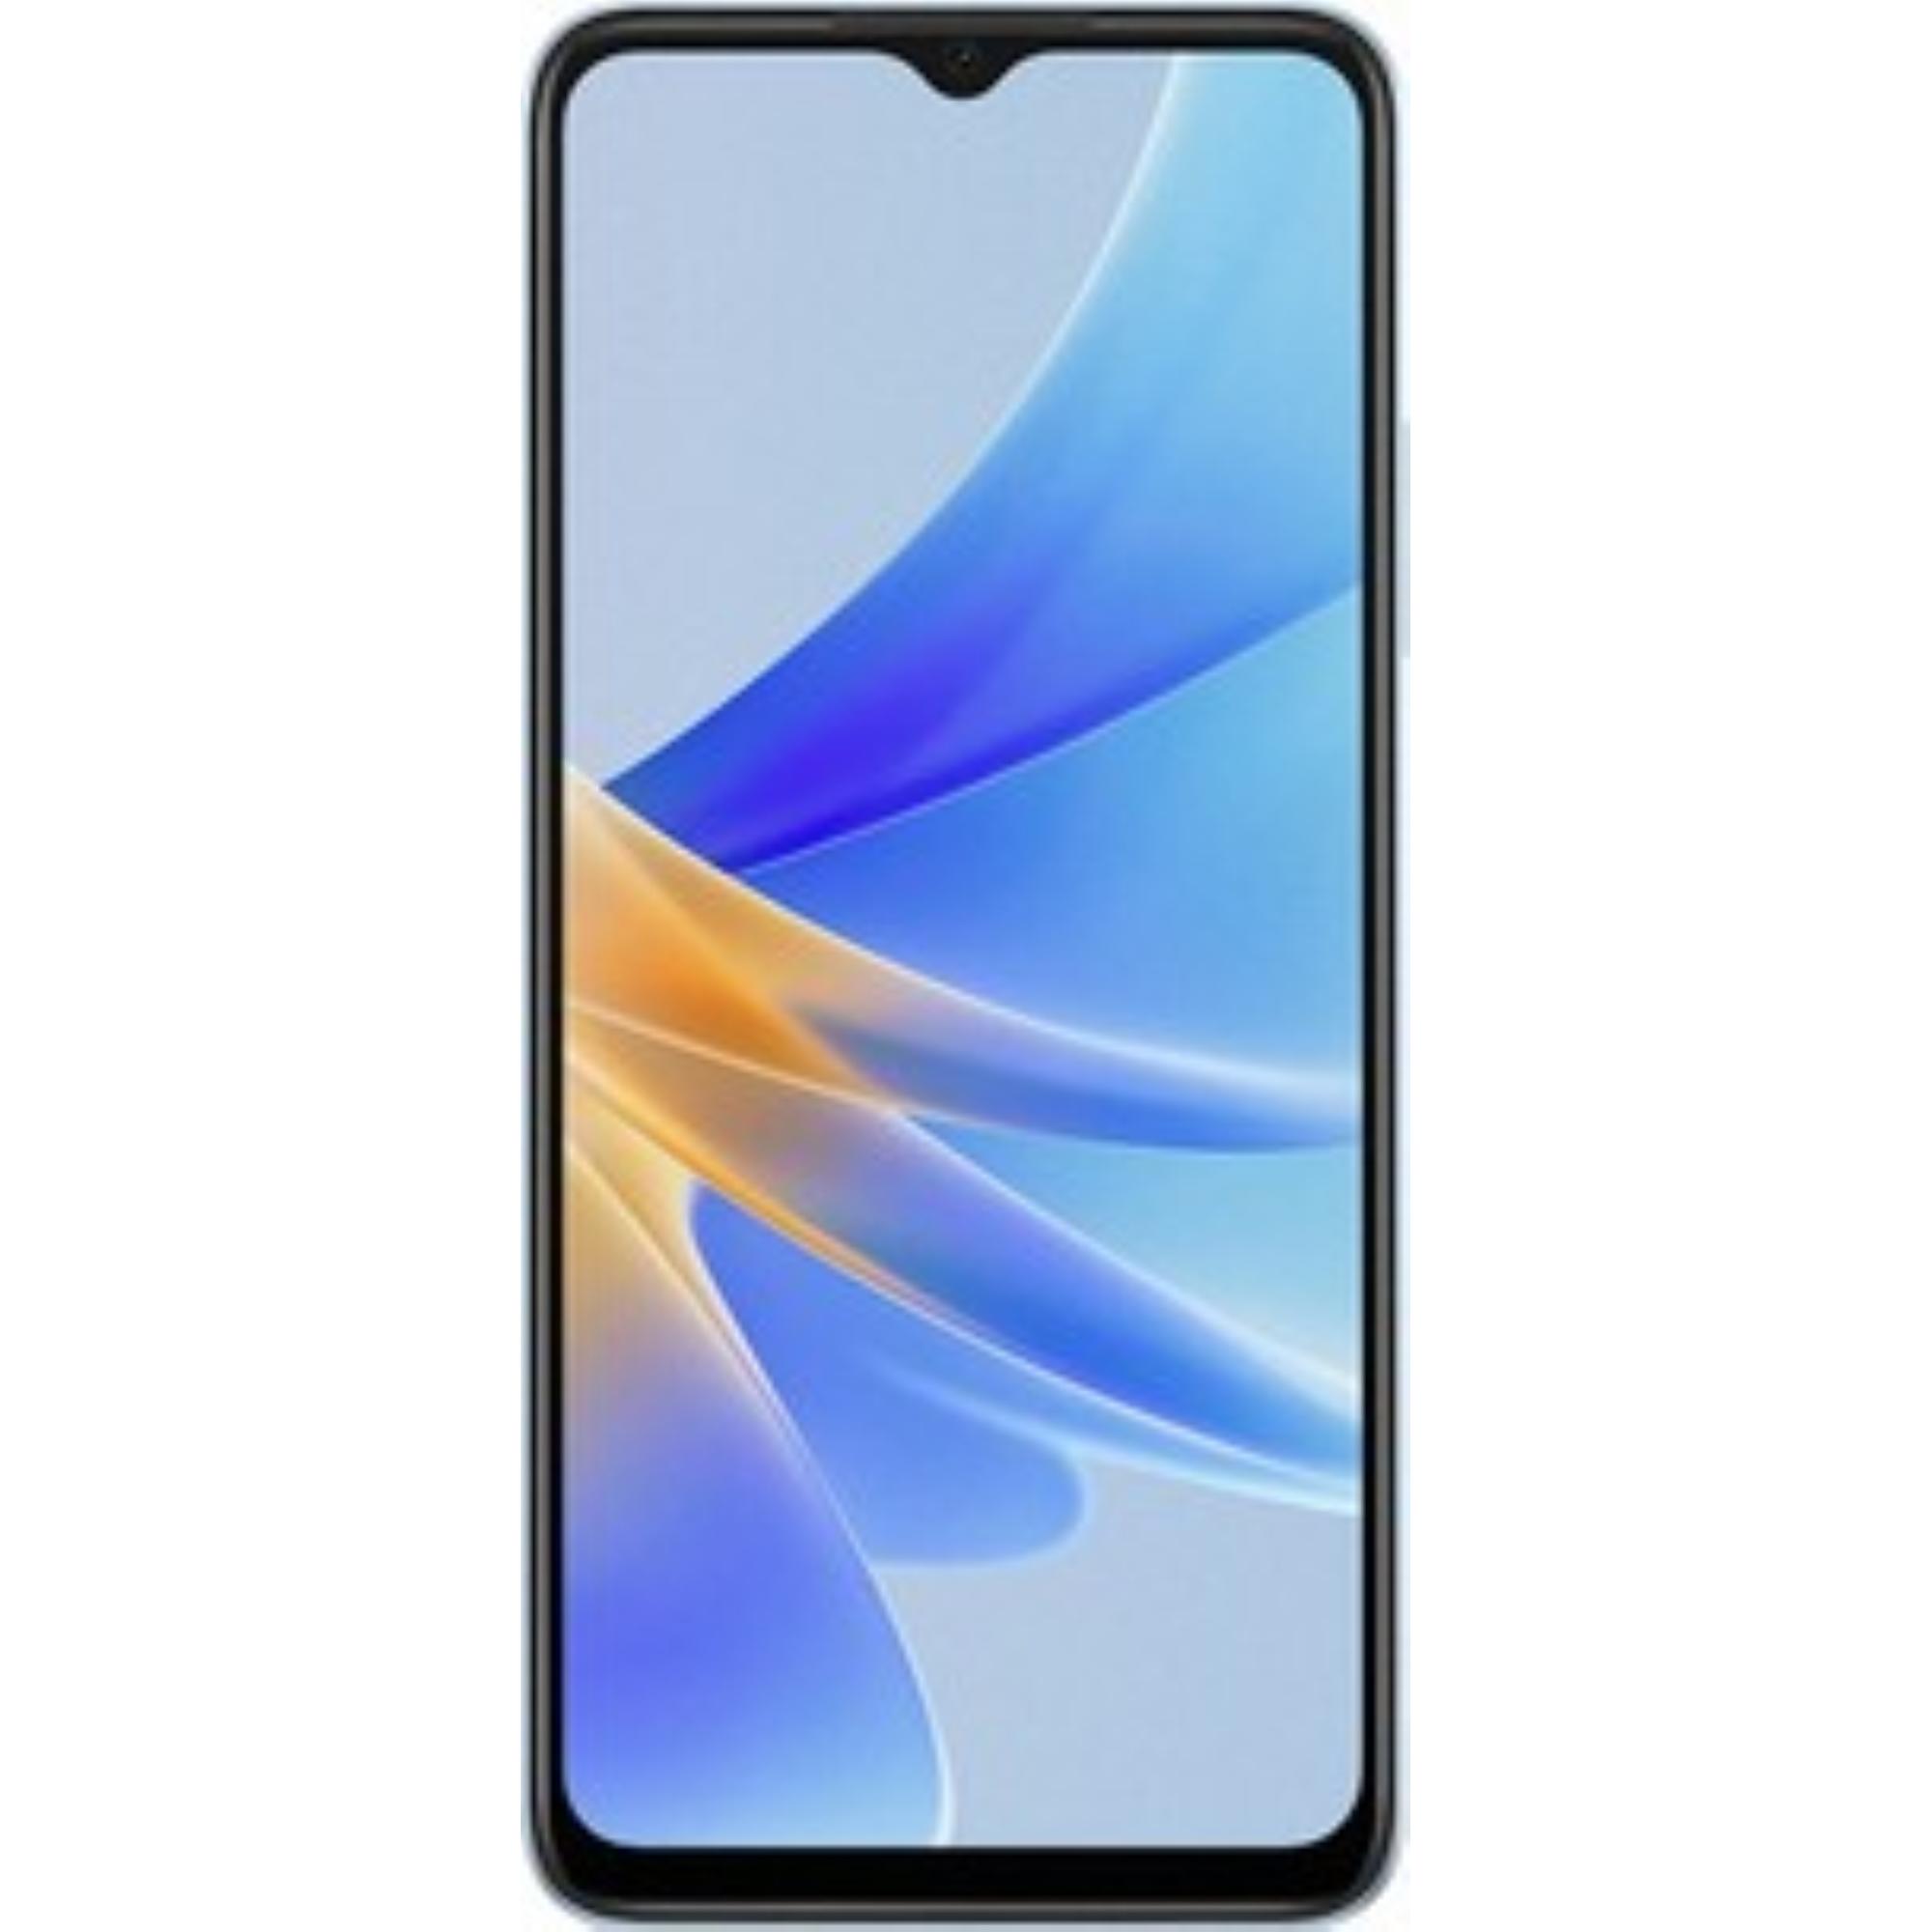 SmartPhone – OPPO A17 / 64GB / 6.56″ / 50MPX / NERO – 8032325343717<br><br><span STYLE="background:#39ac37;"><font color="white"> DISPONIBILE </font></span>